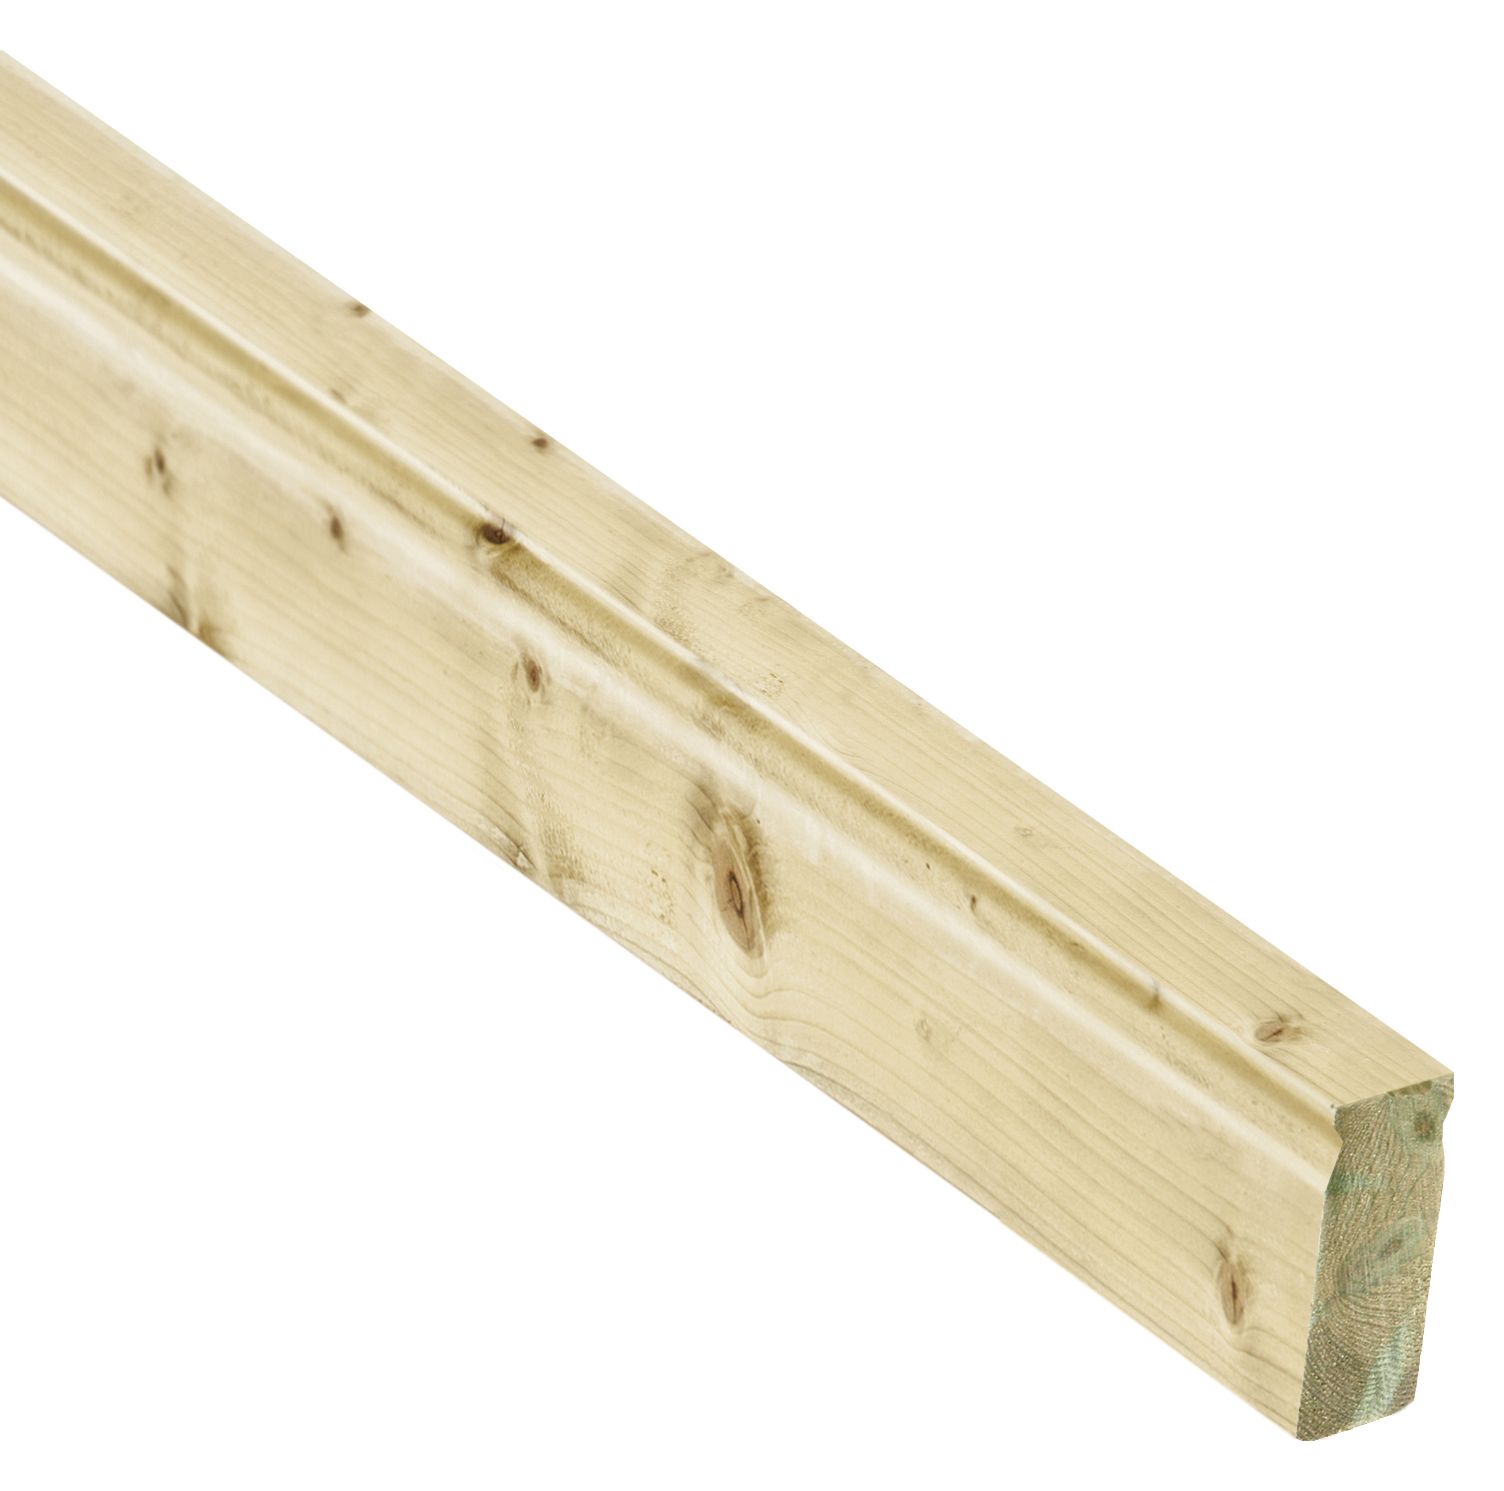 Image of Wickes Predrilled Deck Rail for metal balusters -1.8m